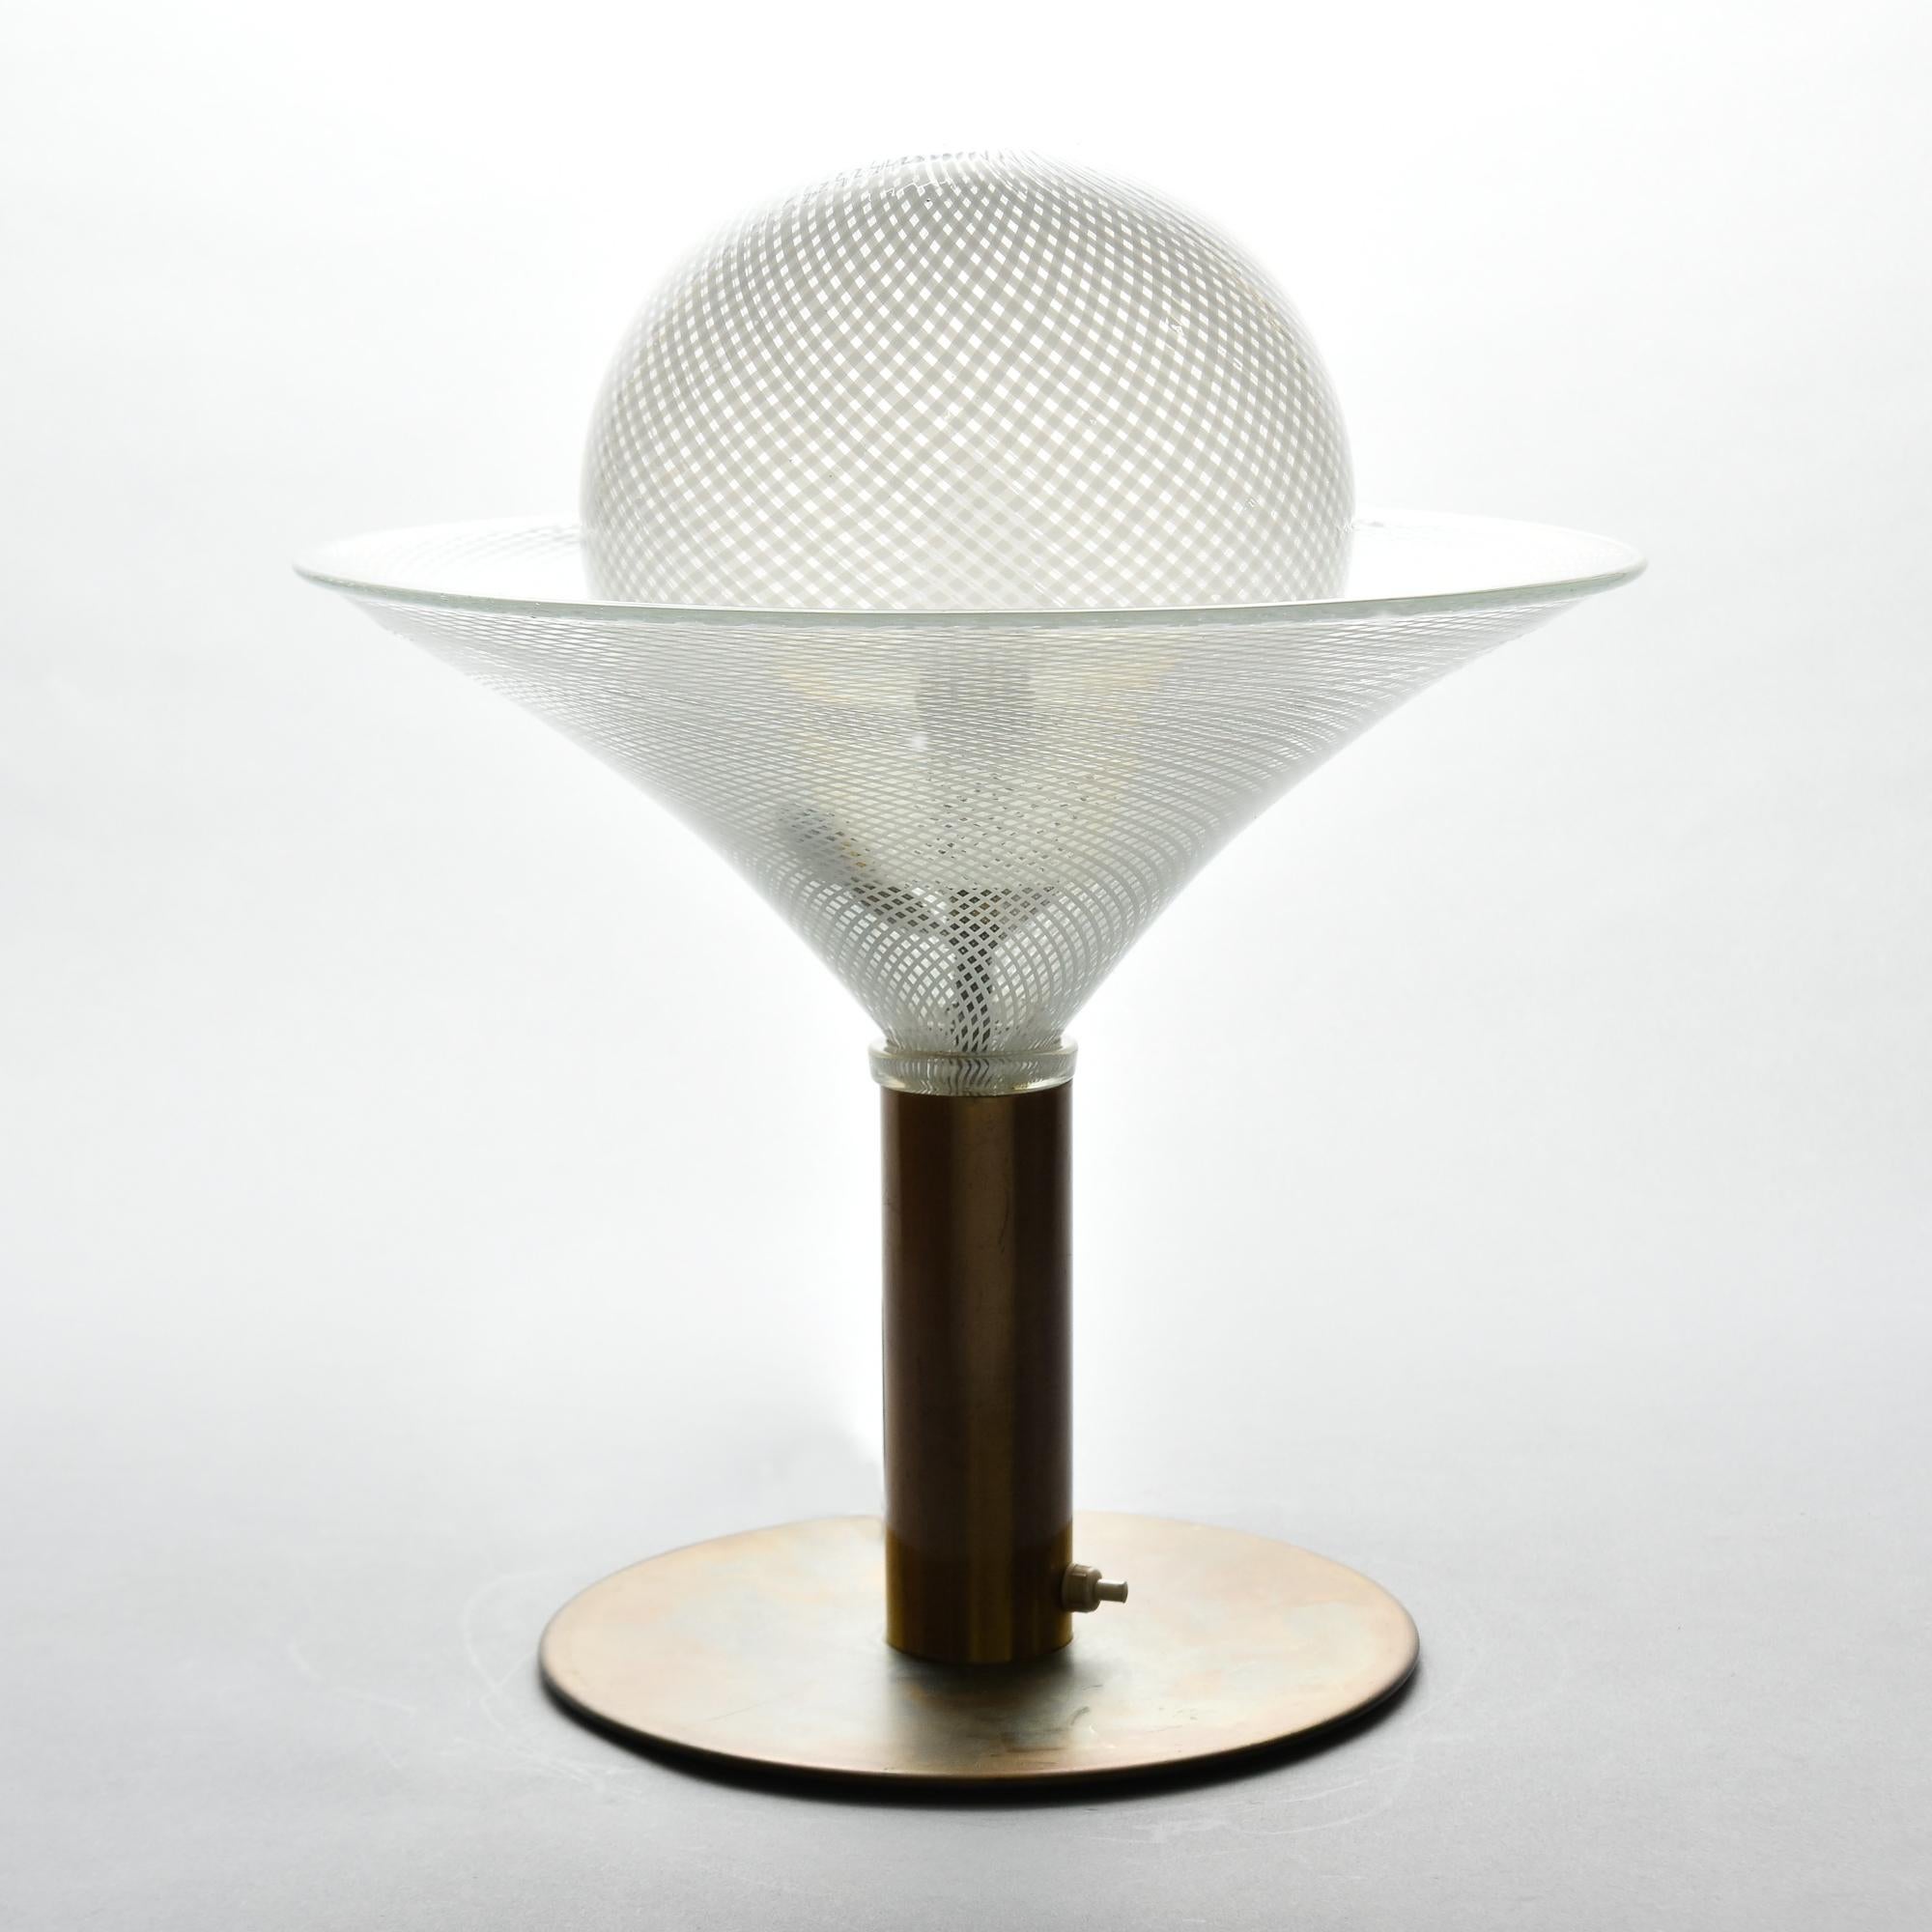 Found in Italy, this circa 1950s Murano glass table lamp has a flat, round brass base with a brass stem that supports a martini-glass-shaped Murano glass base with a mouth blown globe that covers a single light bulb. Glass is clear with a white